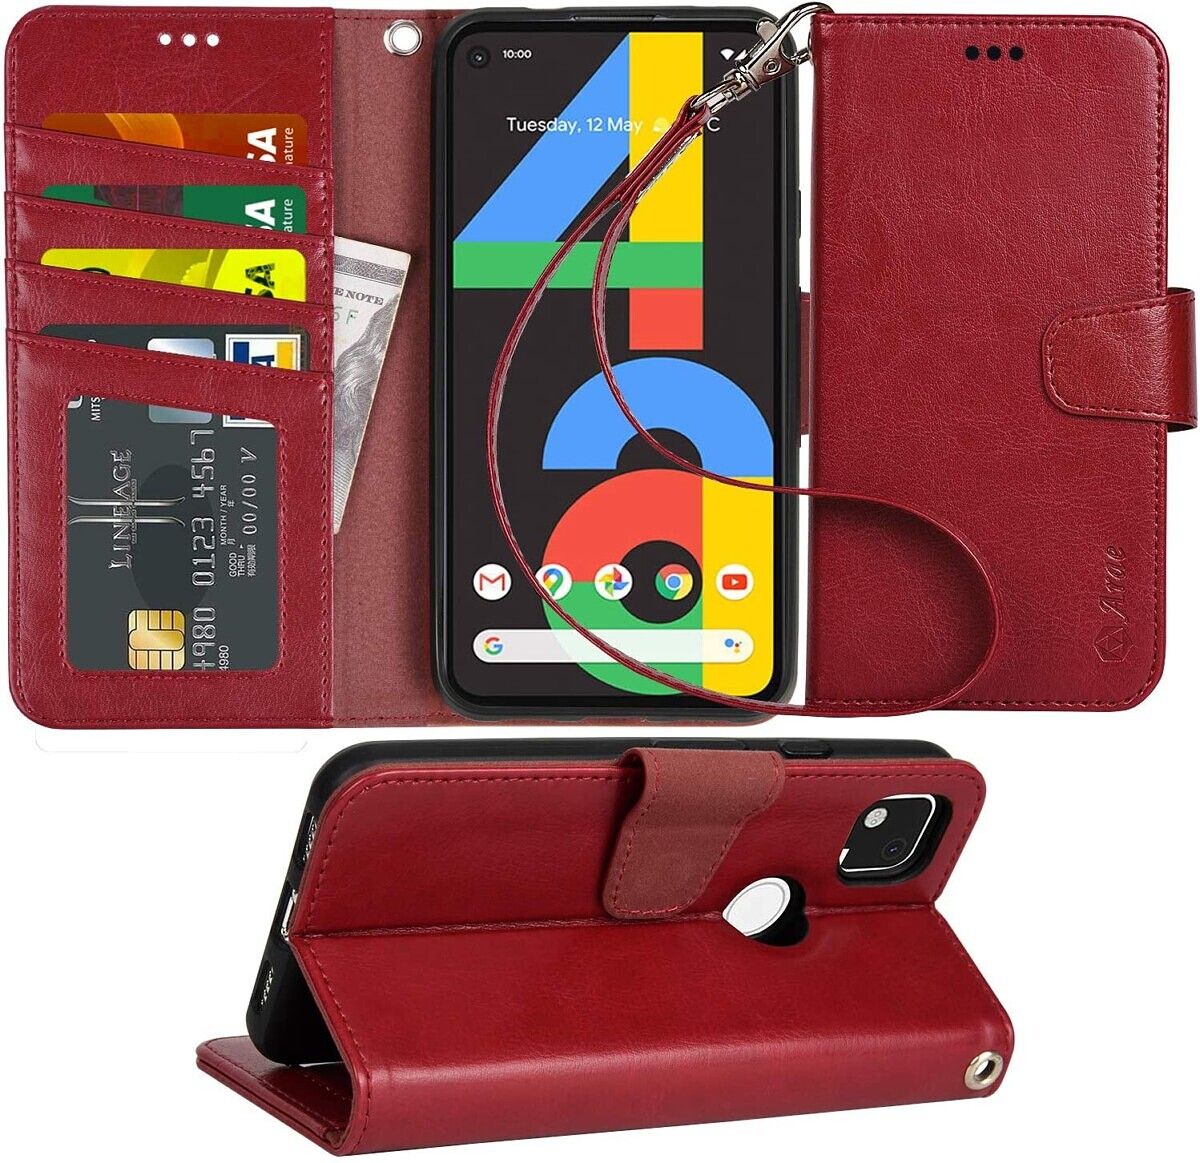 The Arae case provides a full wallet case for the Google Pixel 4a. Hold your ID card, credit cards, and money in one place! Also, the extra flap not only protects your phone screen, but you can use it to prop the Pixel 4a up.